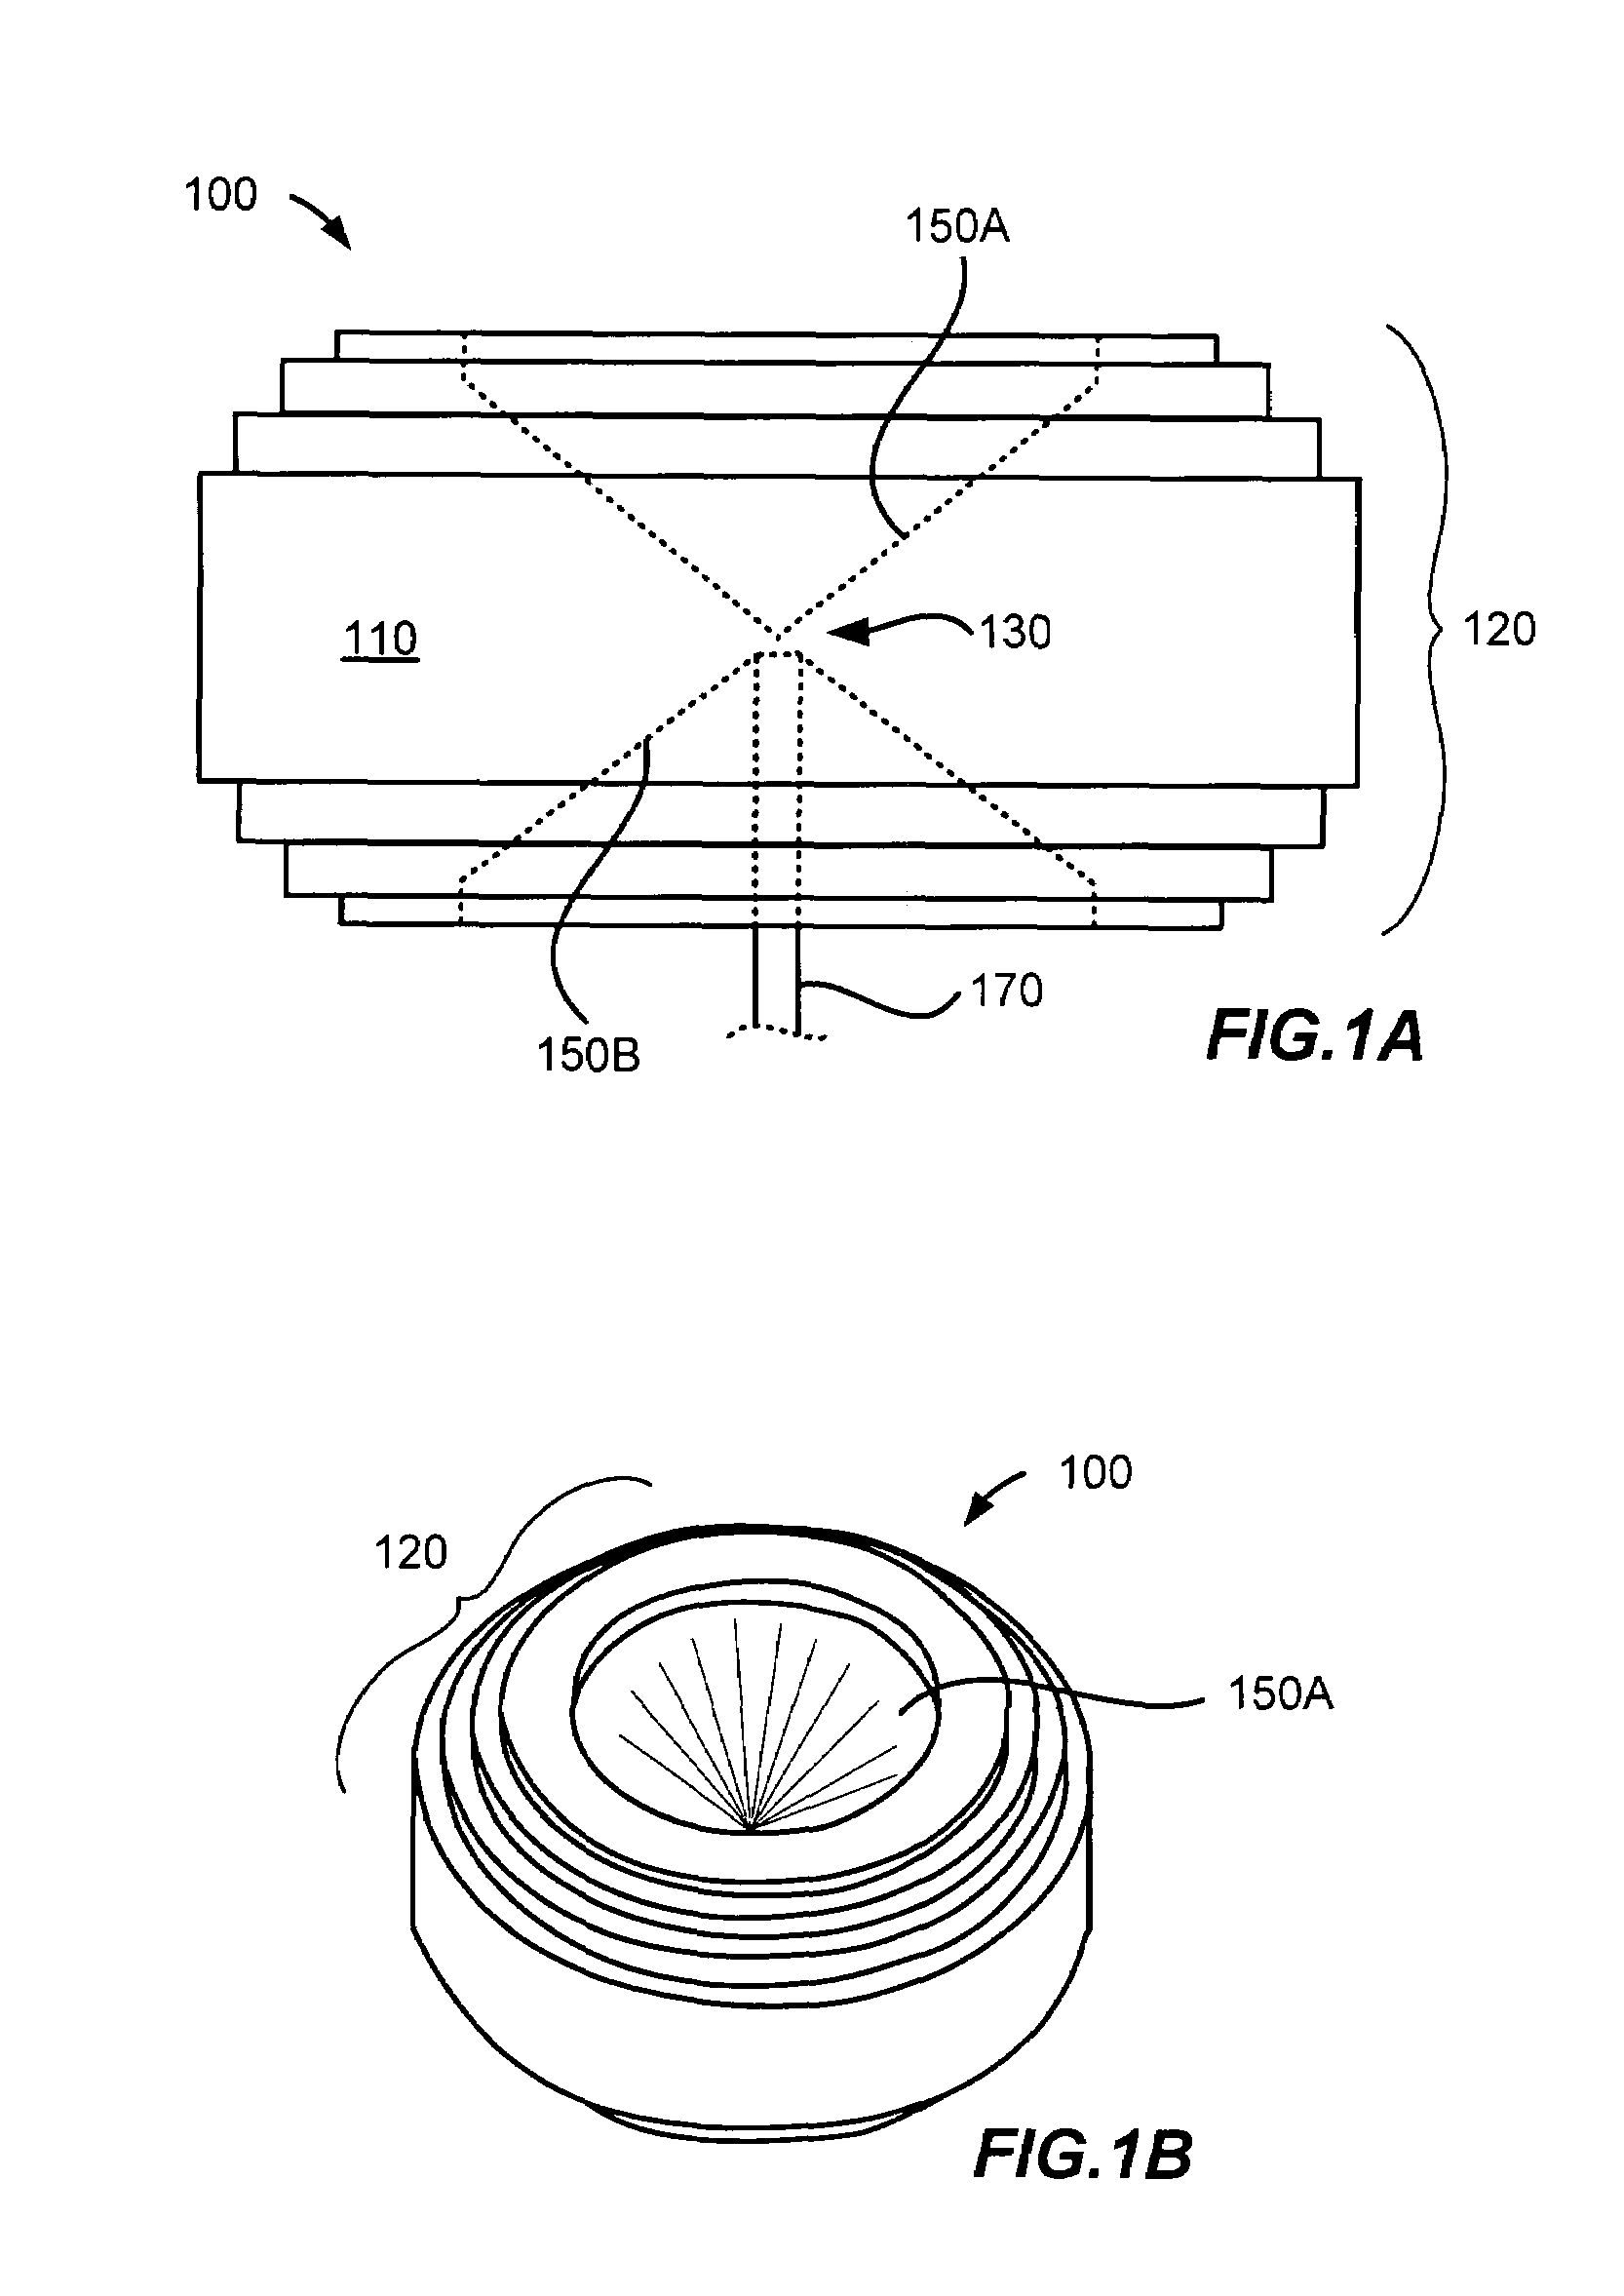 Bicone pattern shaping device